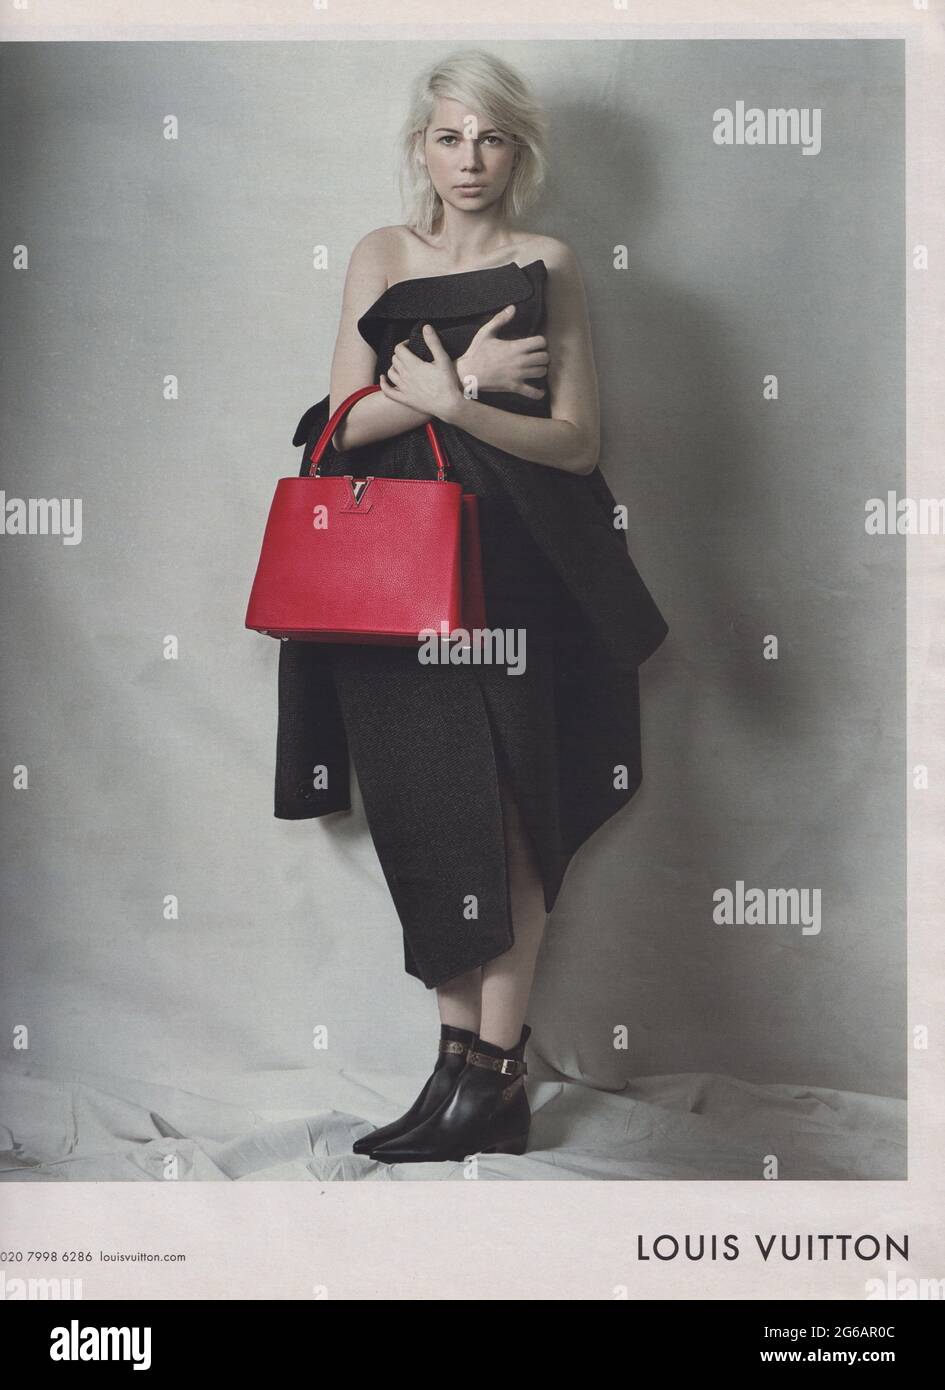 poster advertising Louis Vuitton handbag with Michelle Williams actress in paper magazine from 2015, advertisement, creative advert from 2010s Stock Photo